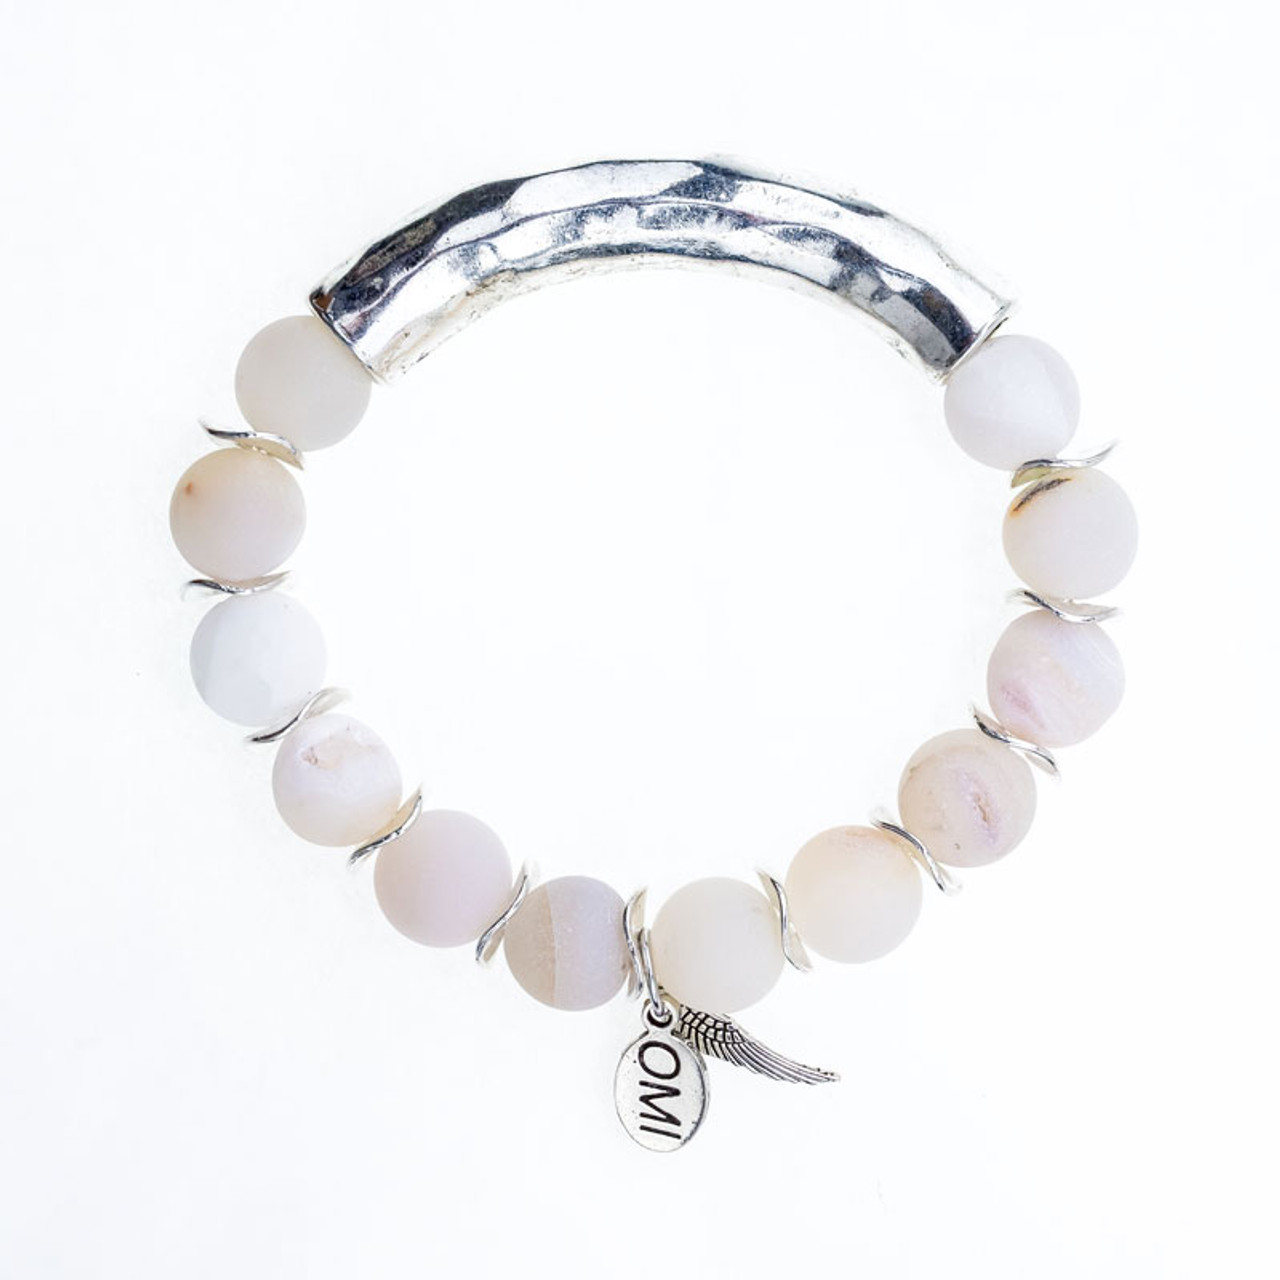 Light Grey Matte Druzy Stone Bead Bracelet with Silver Spacers - 10mm